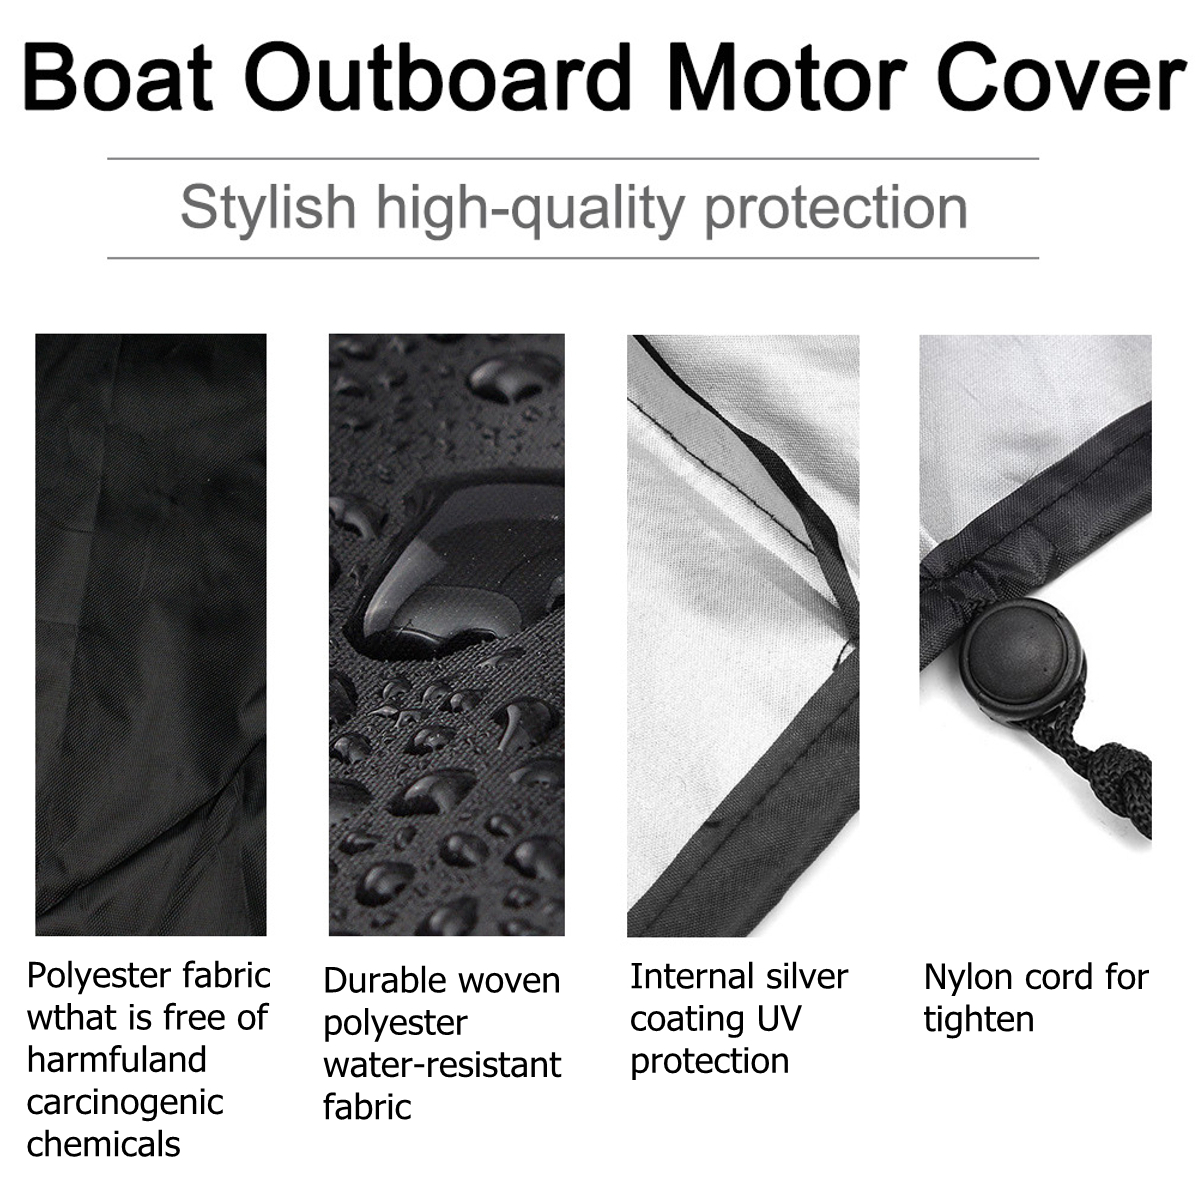 Waterproof-Black-Barbecue-Cover-Anti-Dust-Rain-Cover-Garden-Yard-Grill-Cover-Protector-For-Outdoor-B-1742519-3